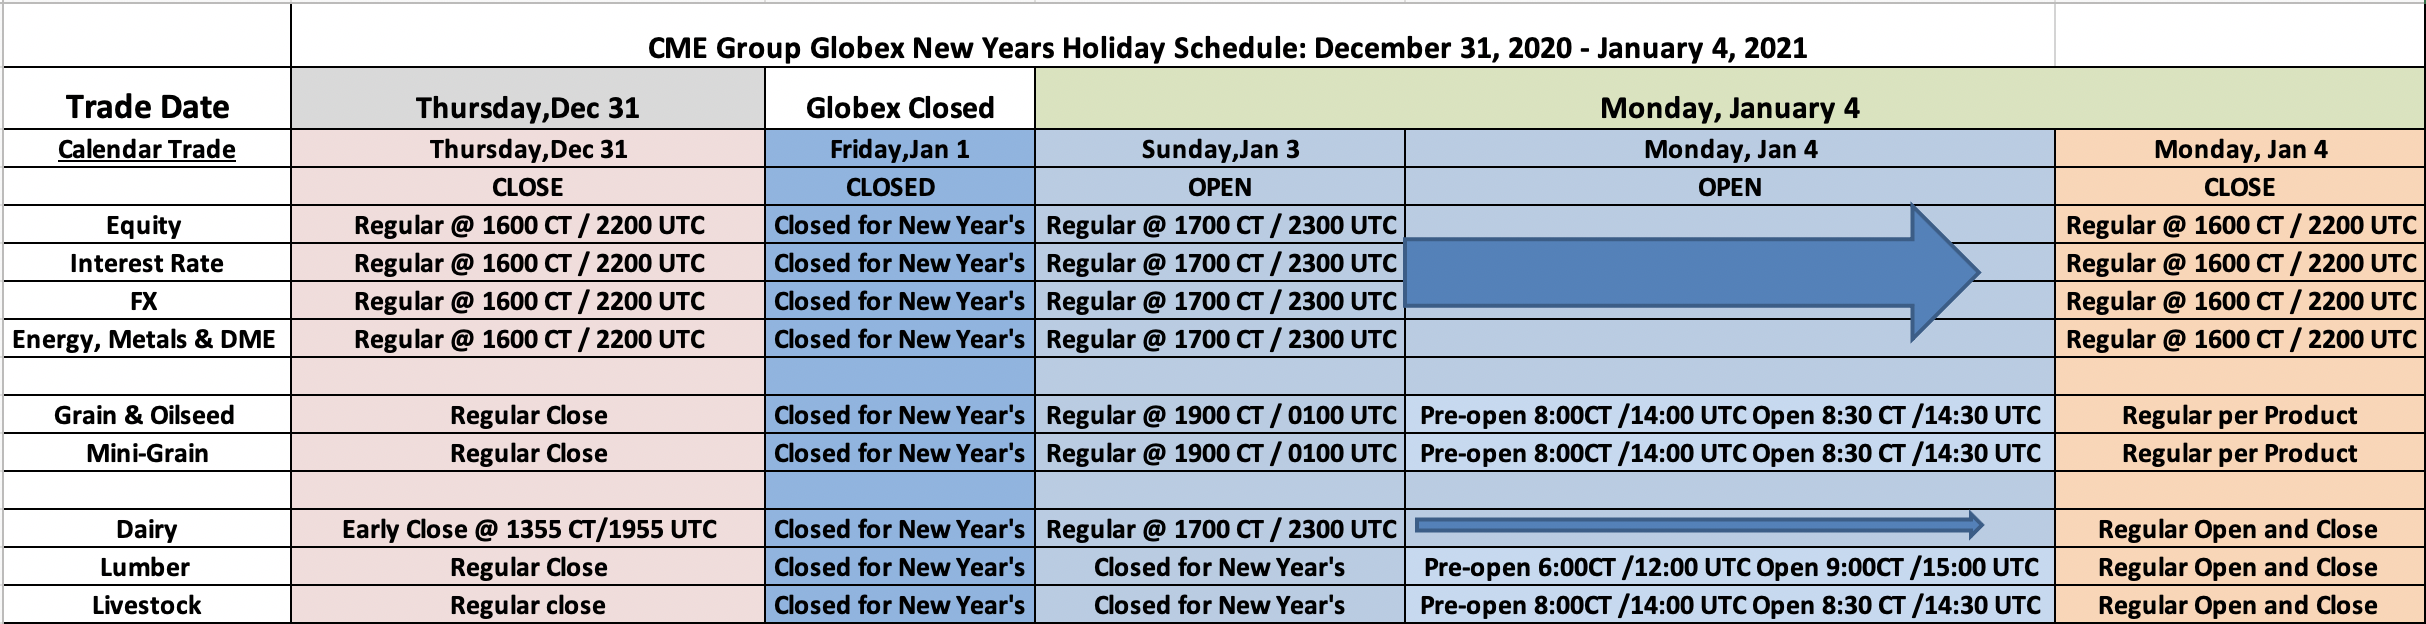 New Years holidays in forex edotco ipo